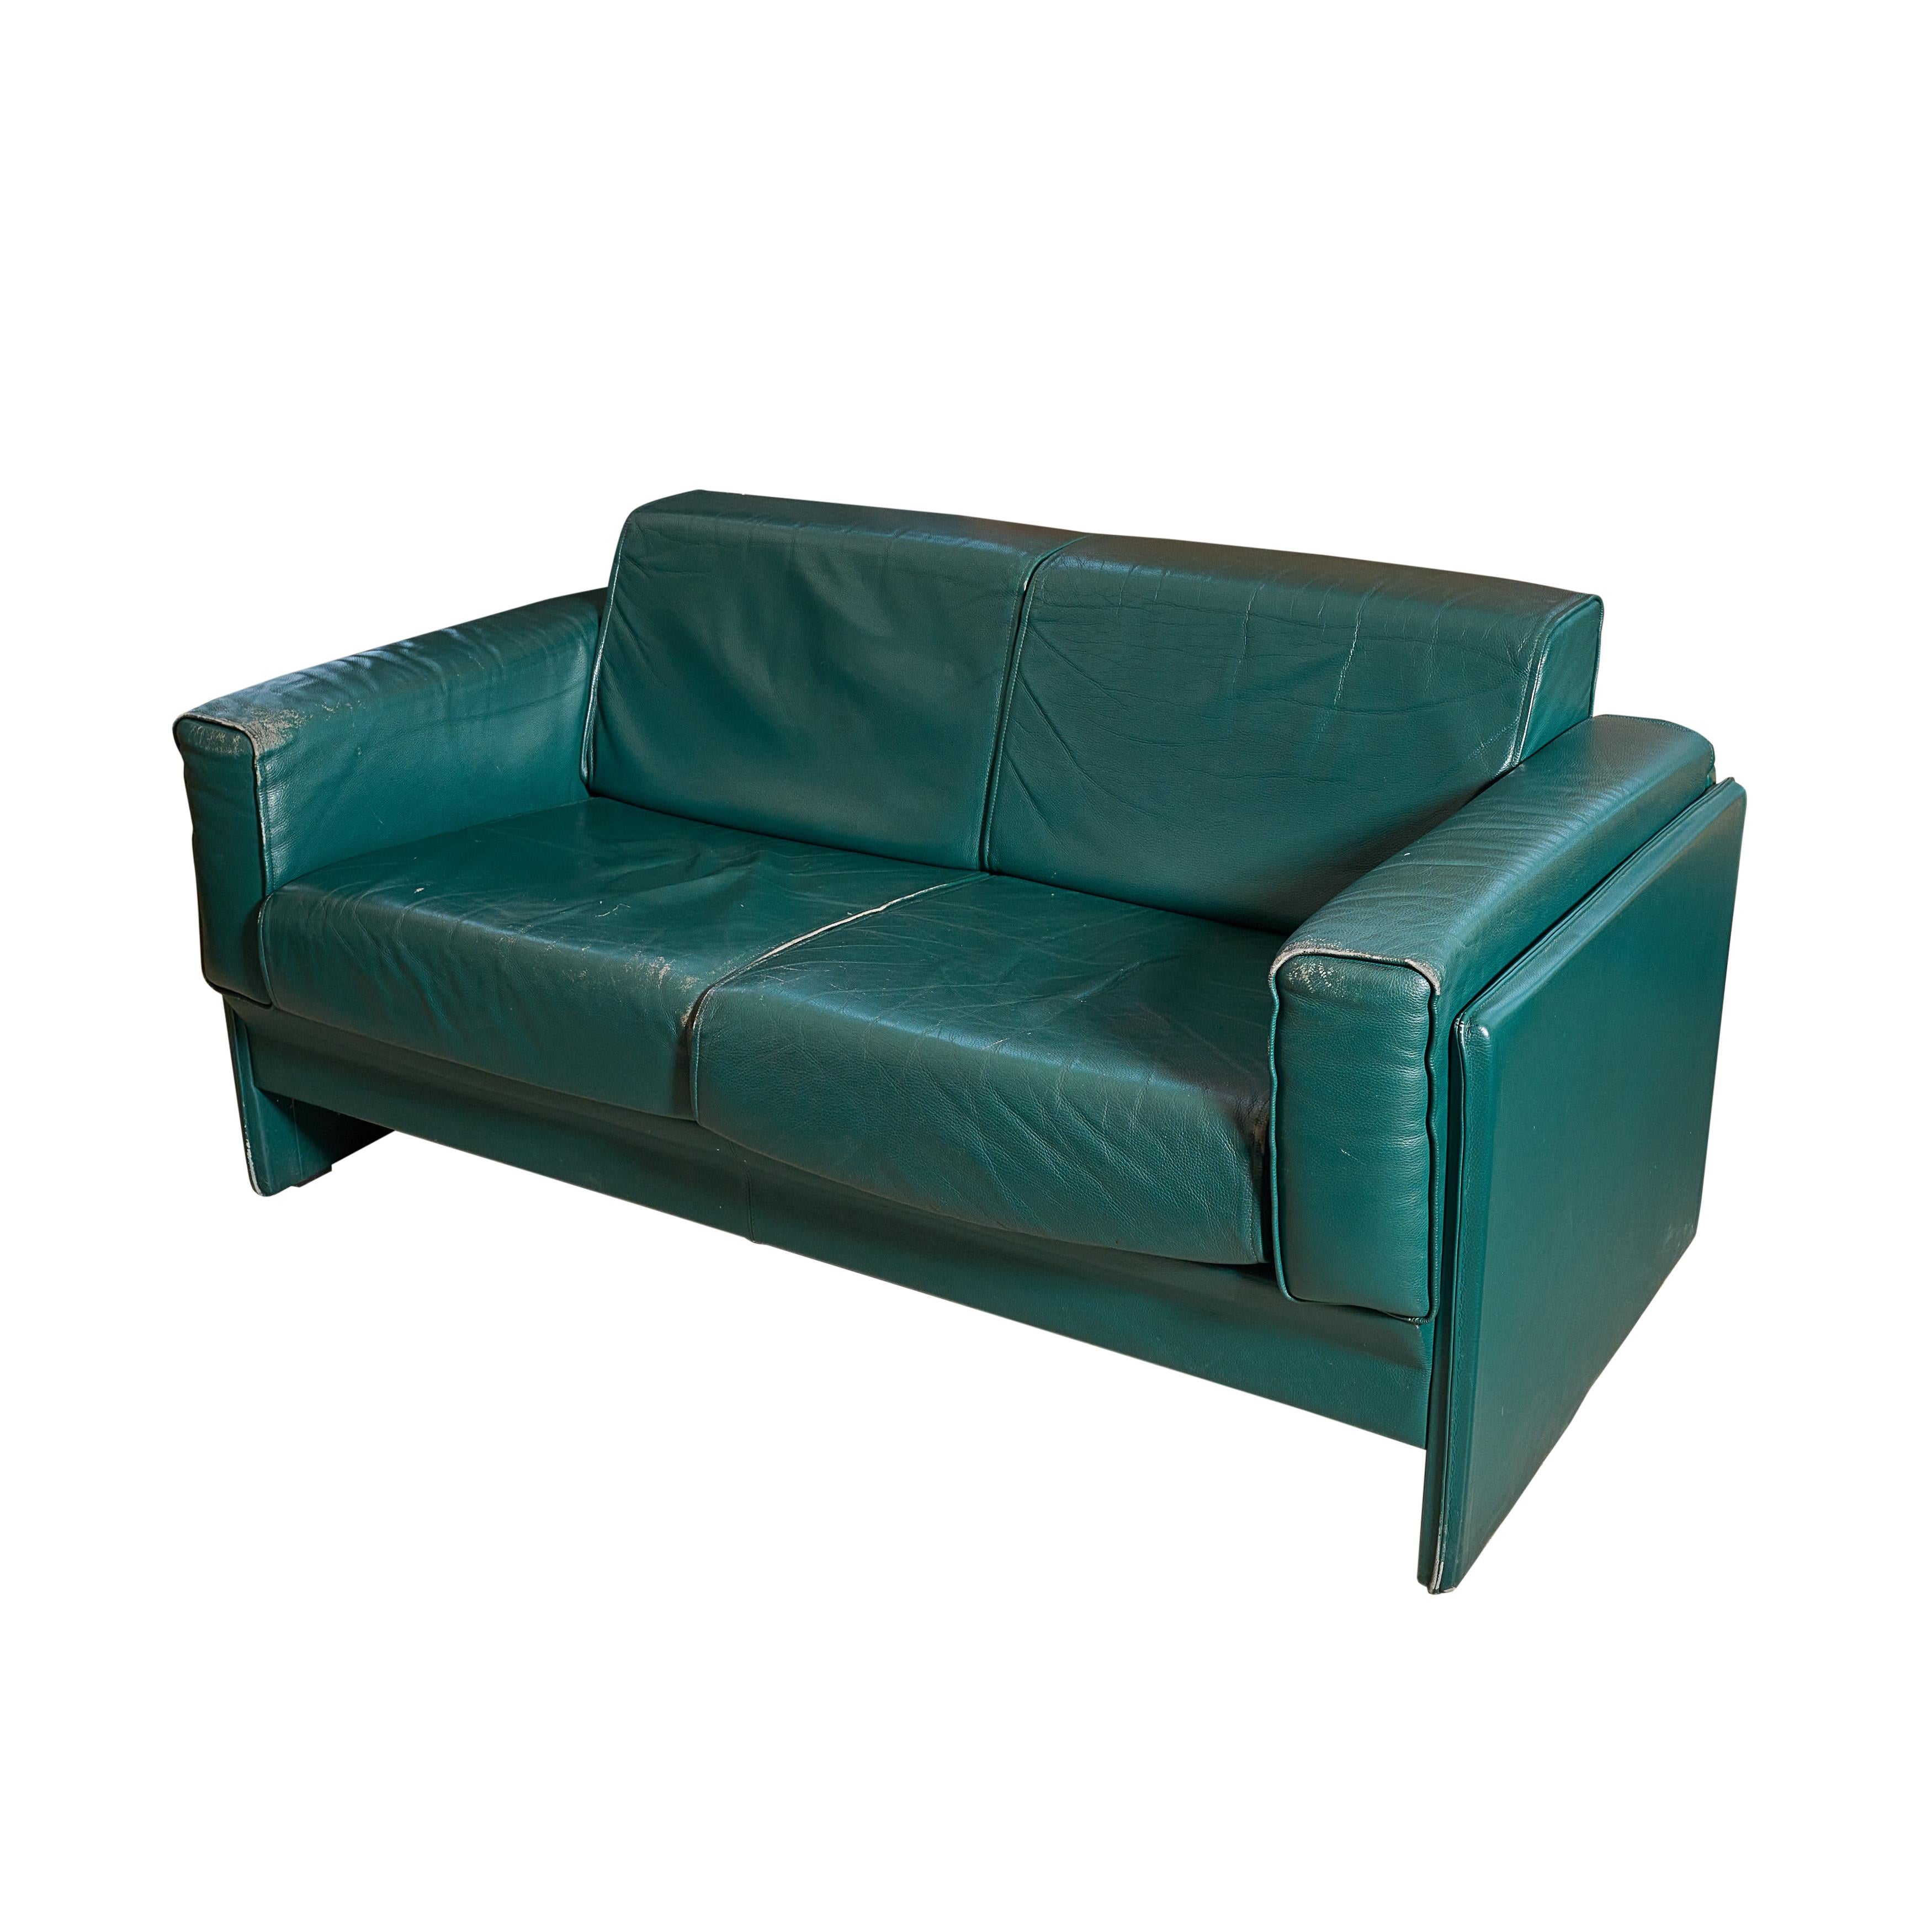 Midcentury sofa / loveseat in green leather from a Milan airport.